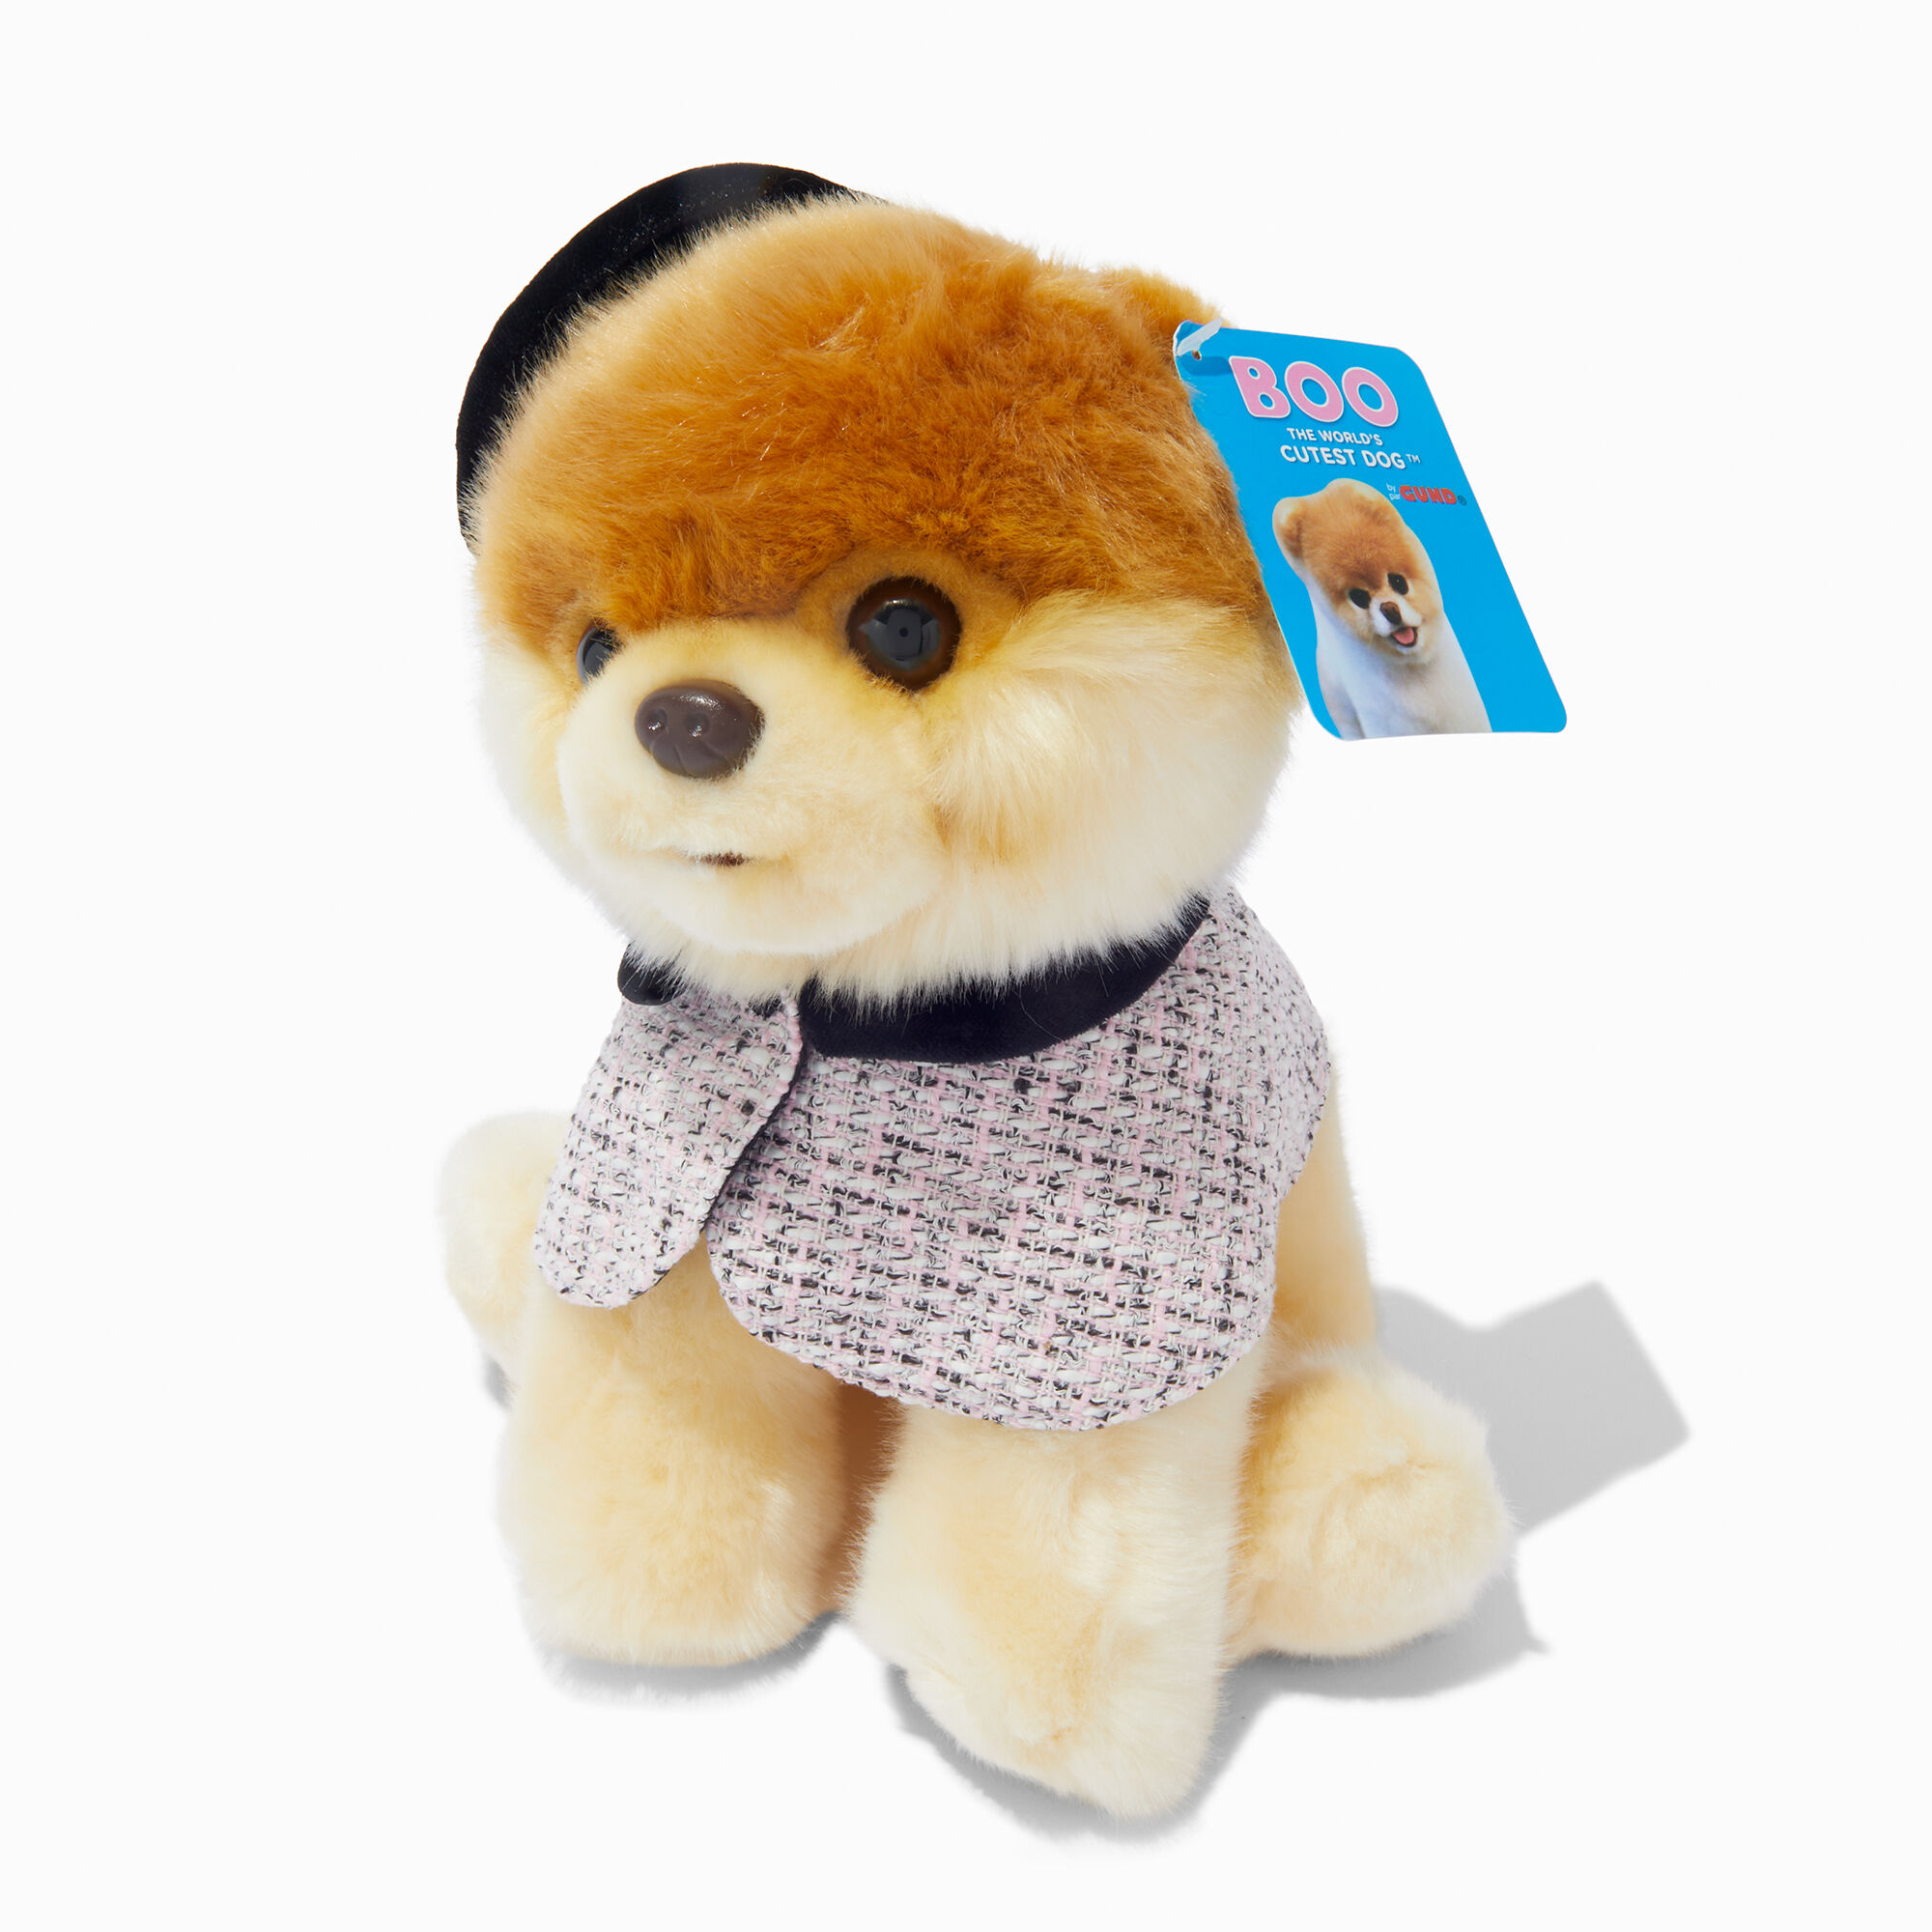 View Claires Boo The Worlds Cutest Dog Paris Beret Soft Toy information